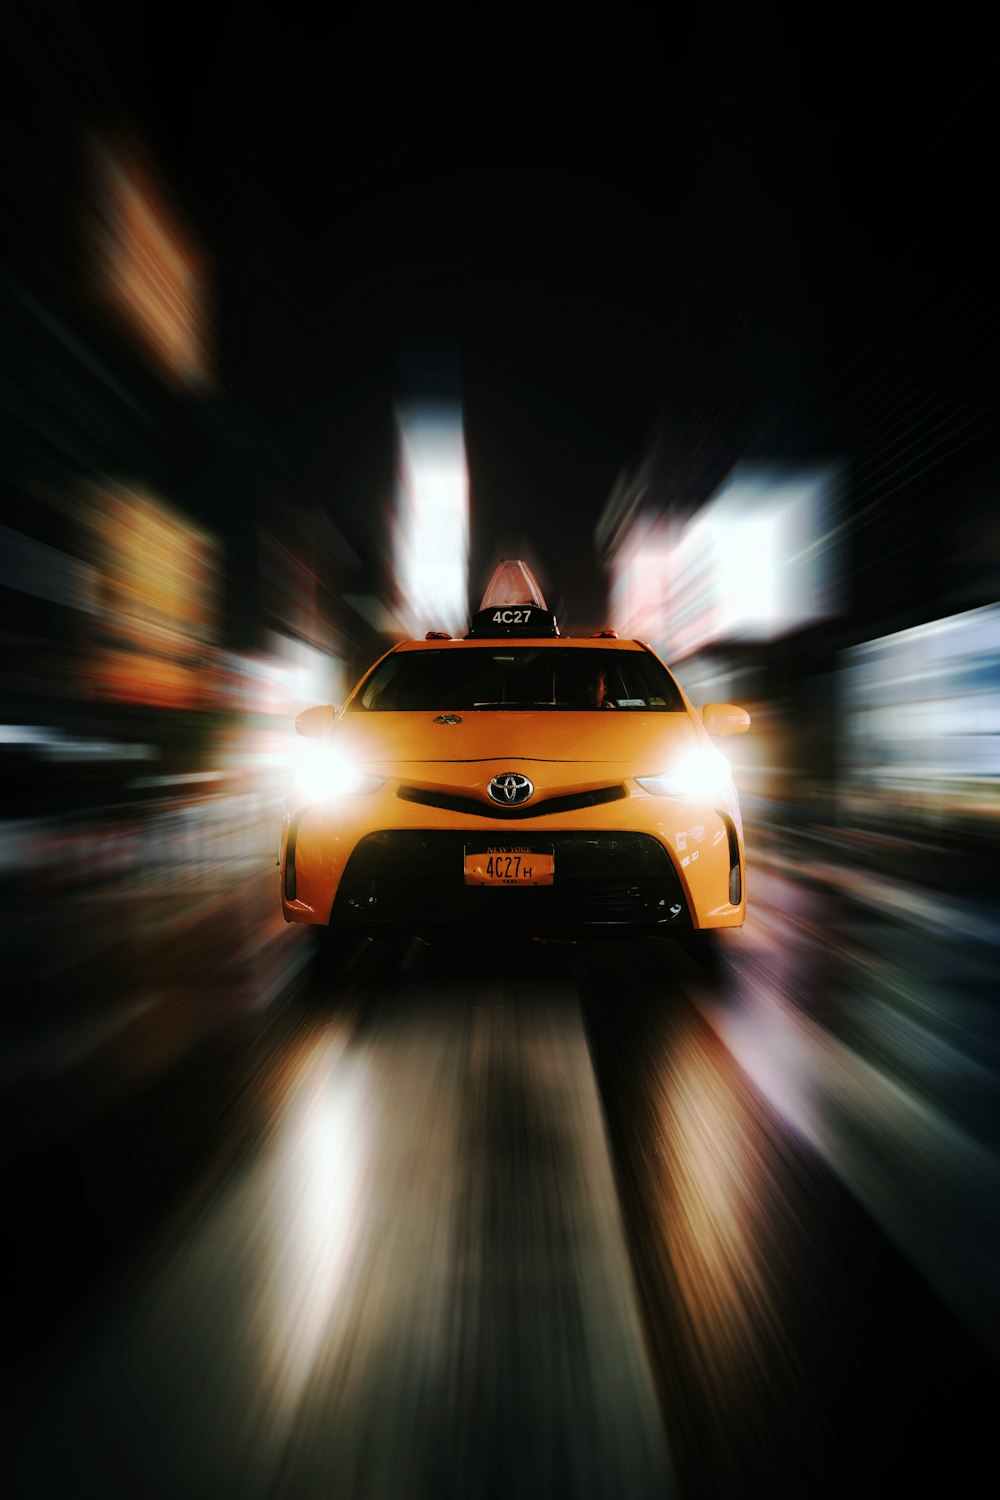 yellow Toyota taxi cab in selective focus phootography